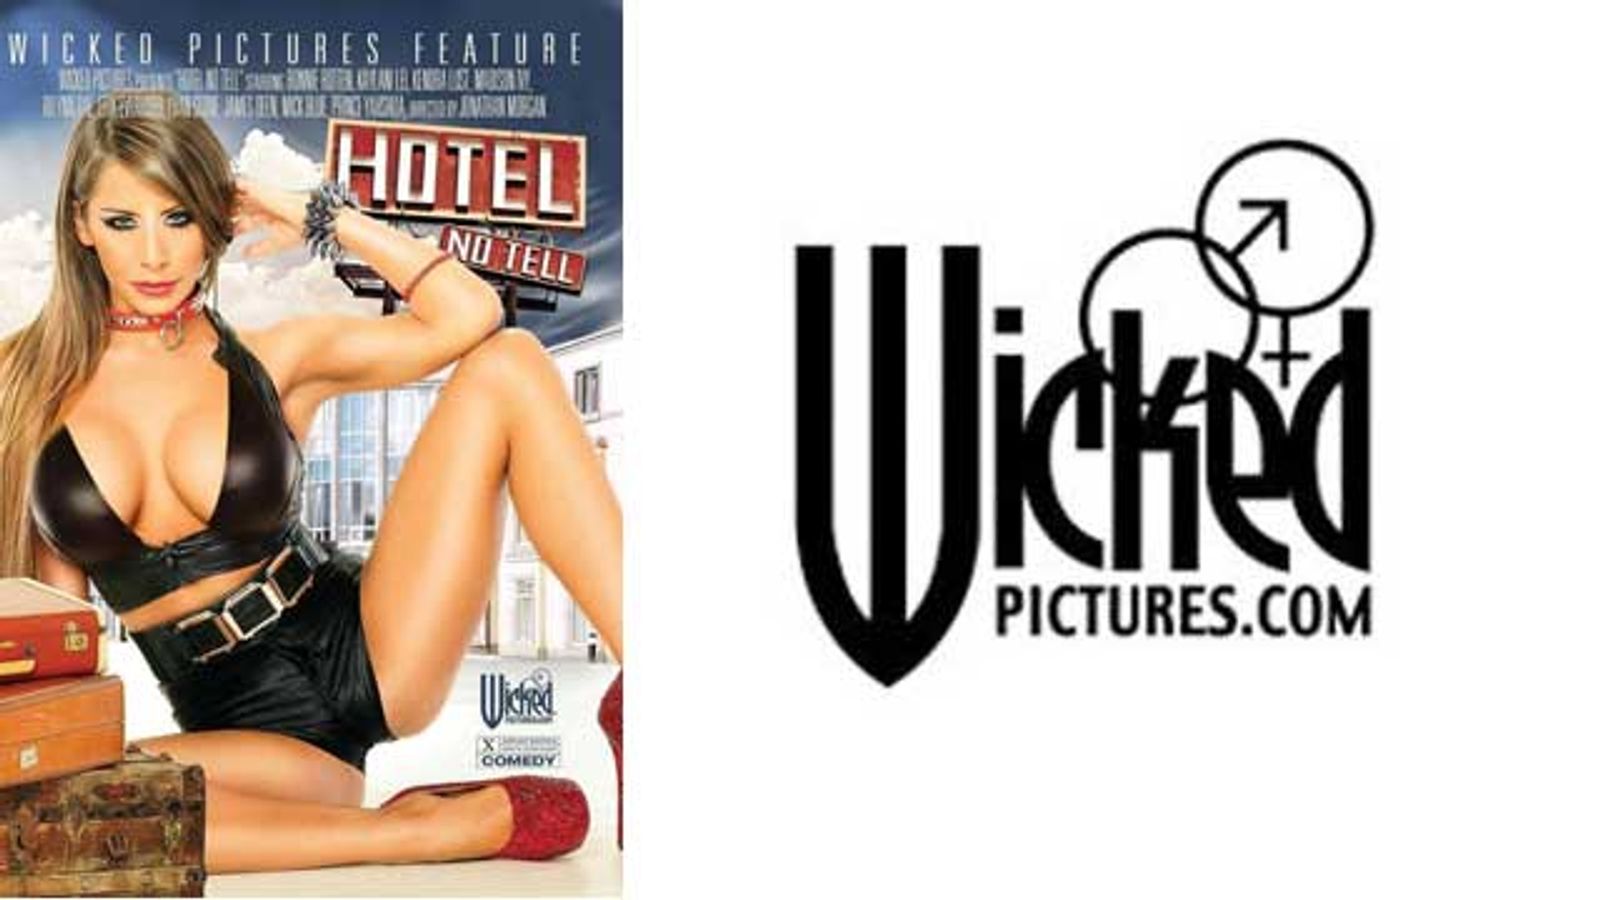 Wicked Pictures Checks Into Jonathan Morgan's 'Hotel No Tell'